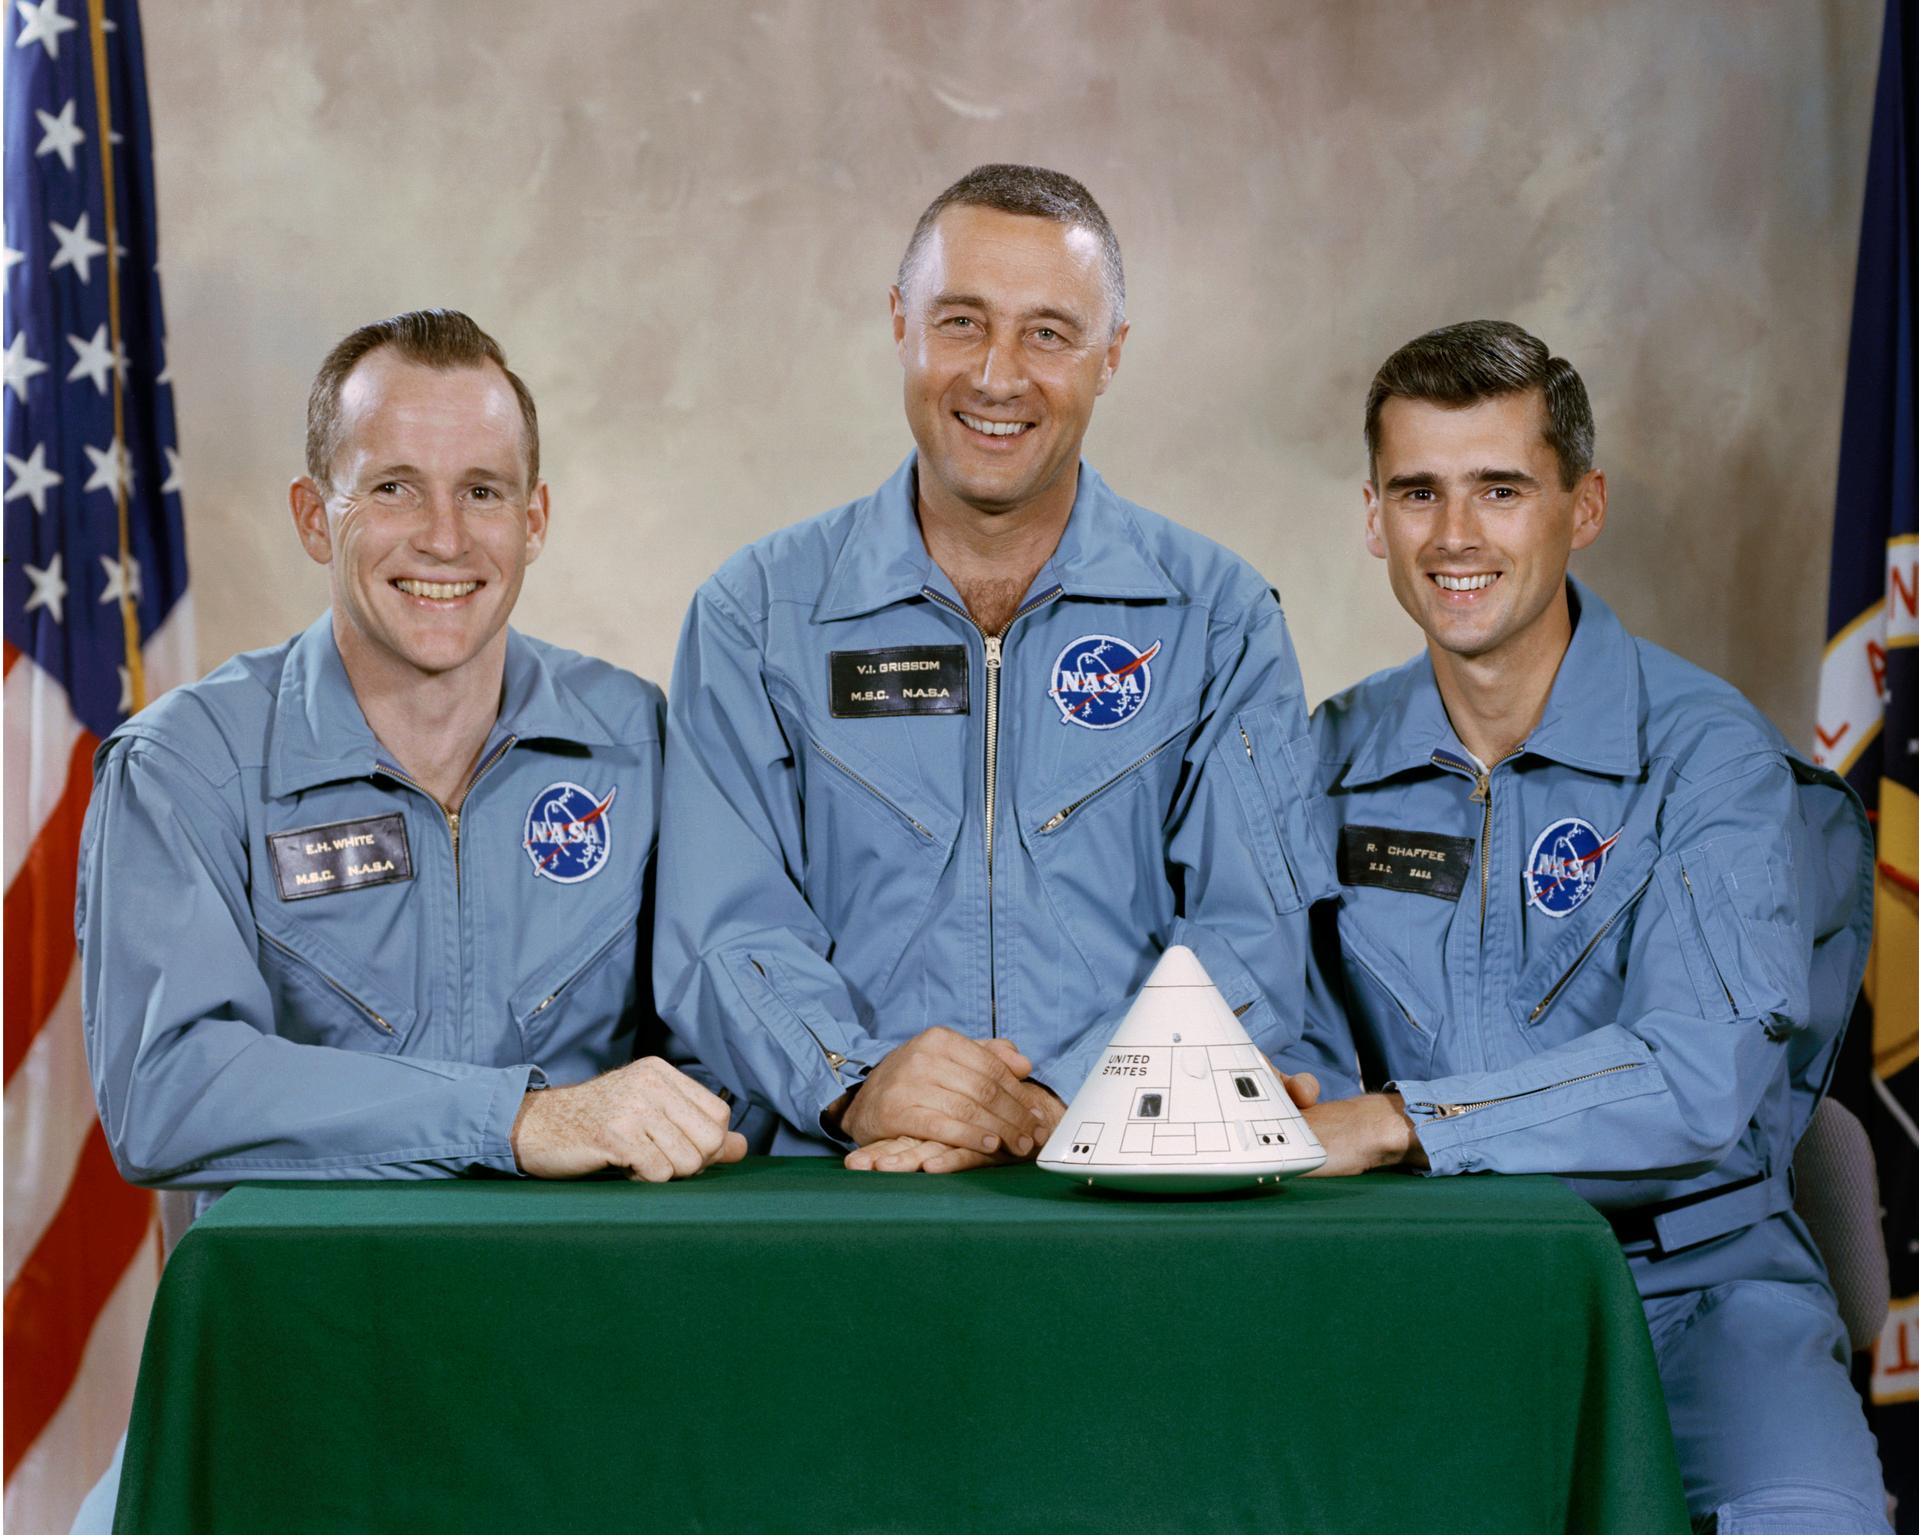 The prime crew of Apollo 1 posing with a model of their capsule (L-r): Ed White, Gus Grissom, and Roger Chaffee. (NASA photo)